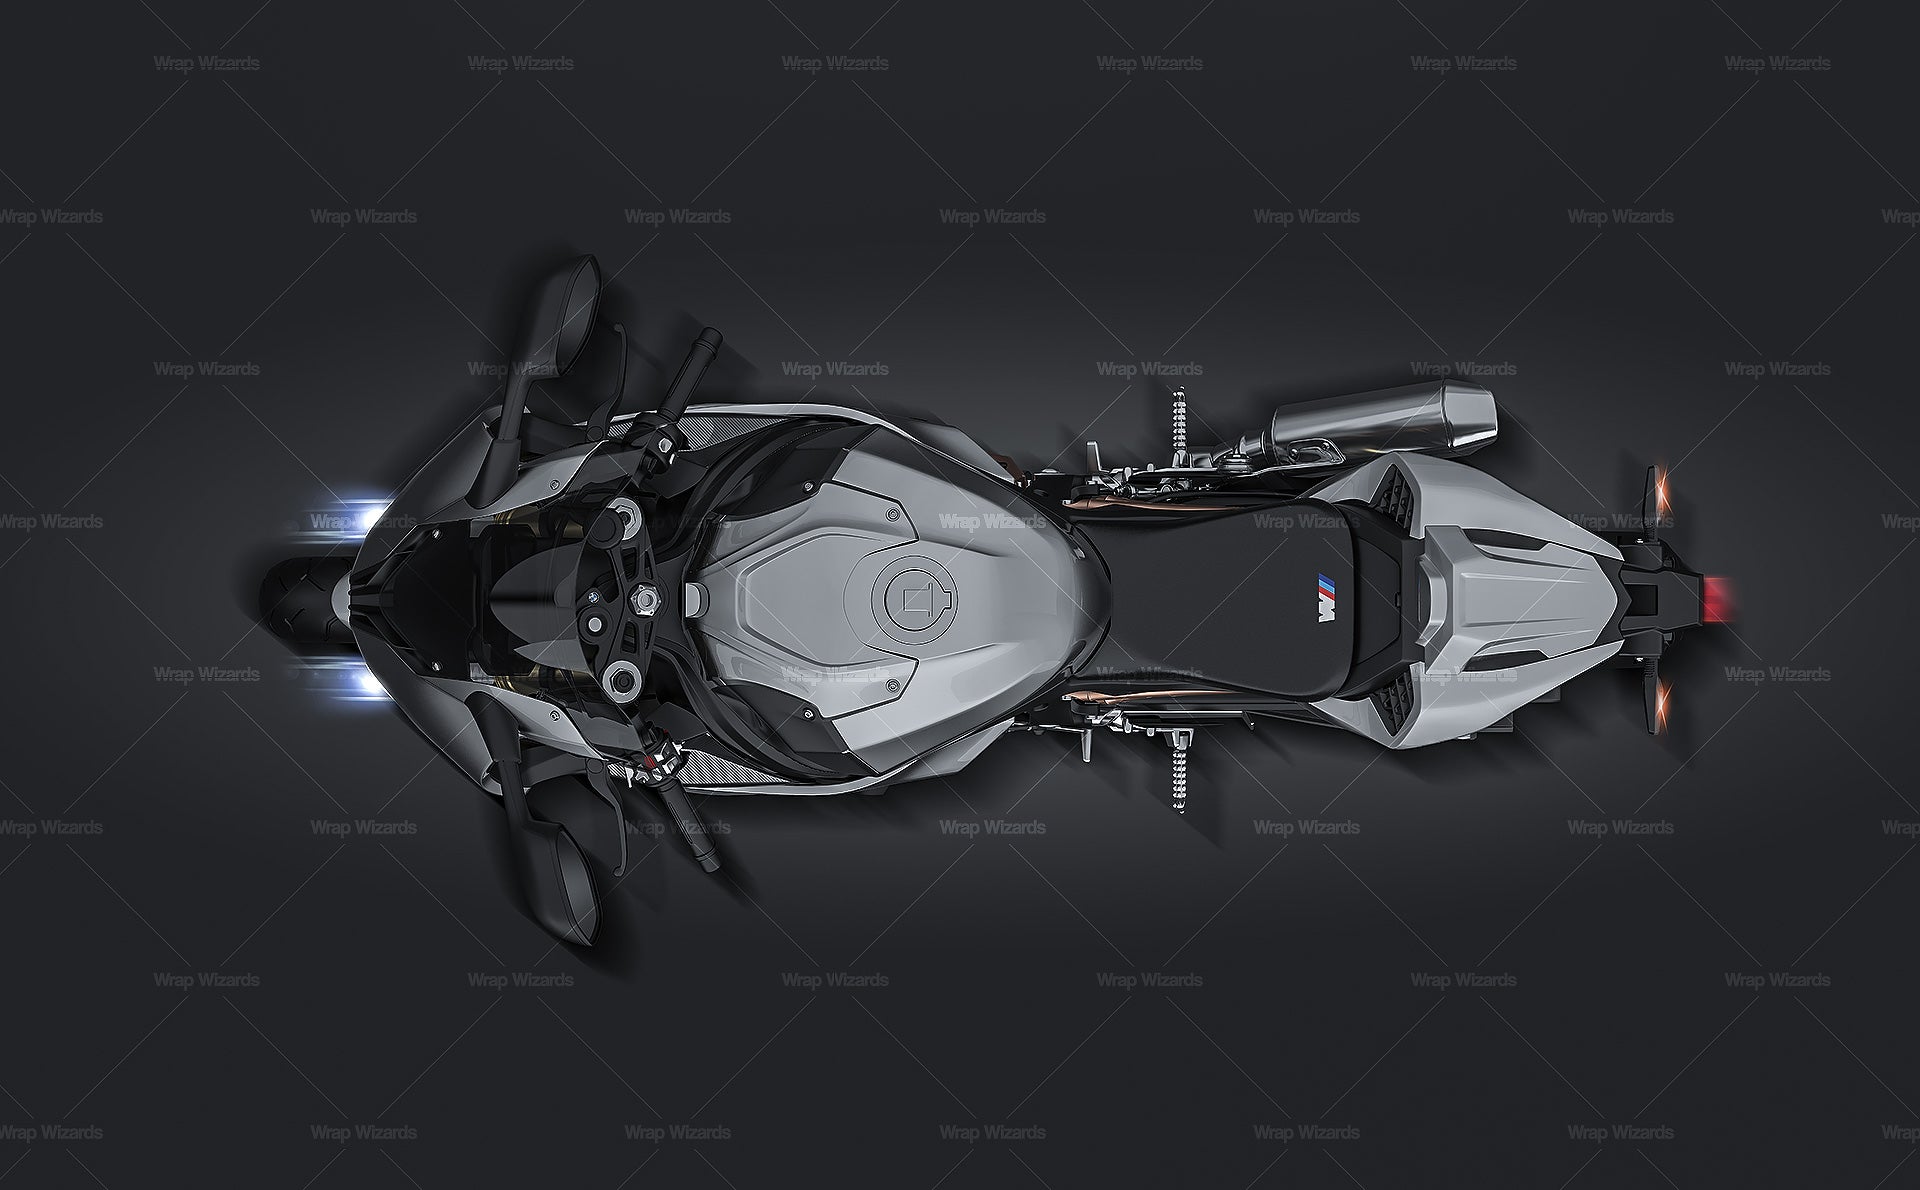 BMW S1000RR 2019 glossy finish - all sides Motorcycle Mockup Template.psd